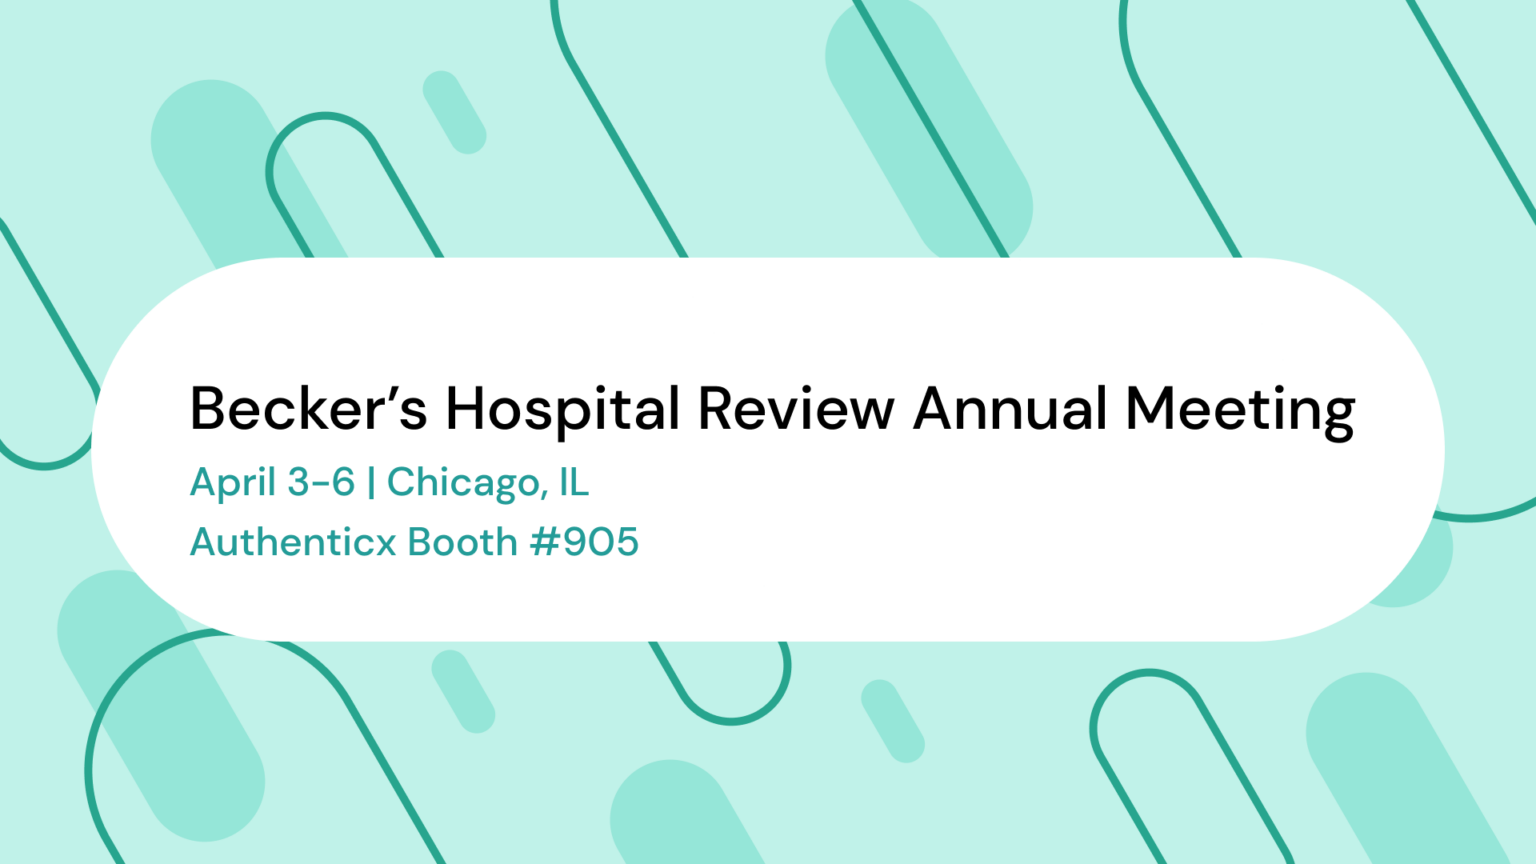 Authenticx at Becker's Hospital Review Annual Meeting